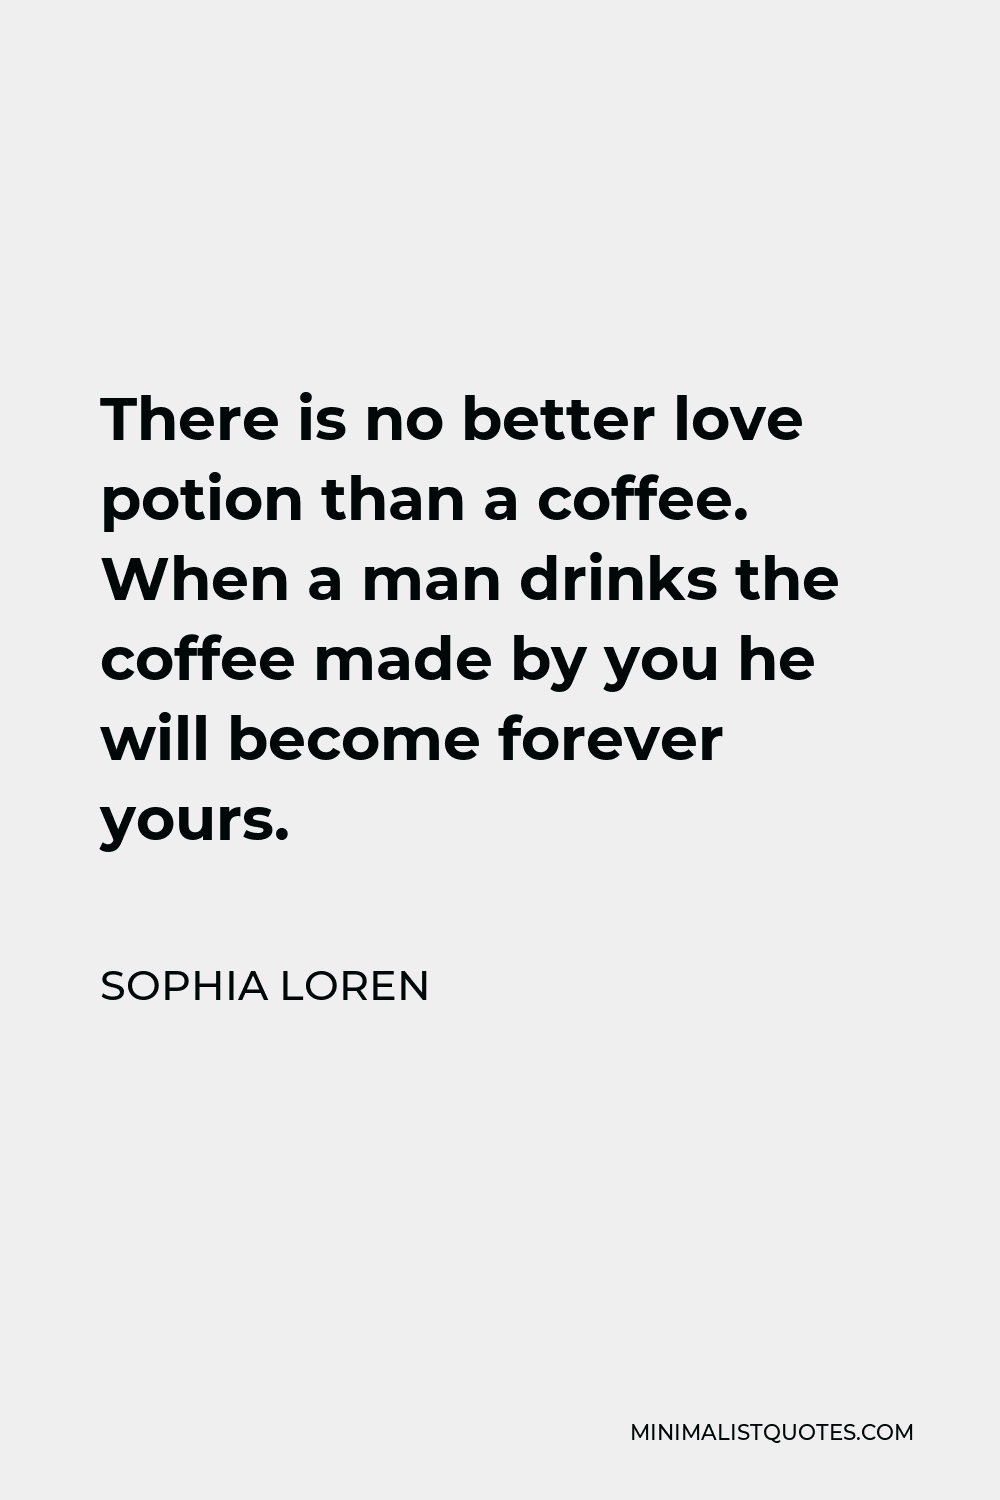 Sophia Loren Quote - There is no better love potion than a coffee. When a man drinks the coffee made by you he will become forever yours.